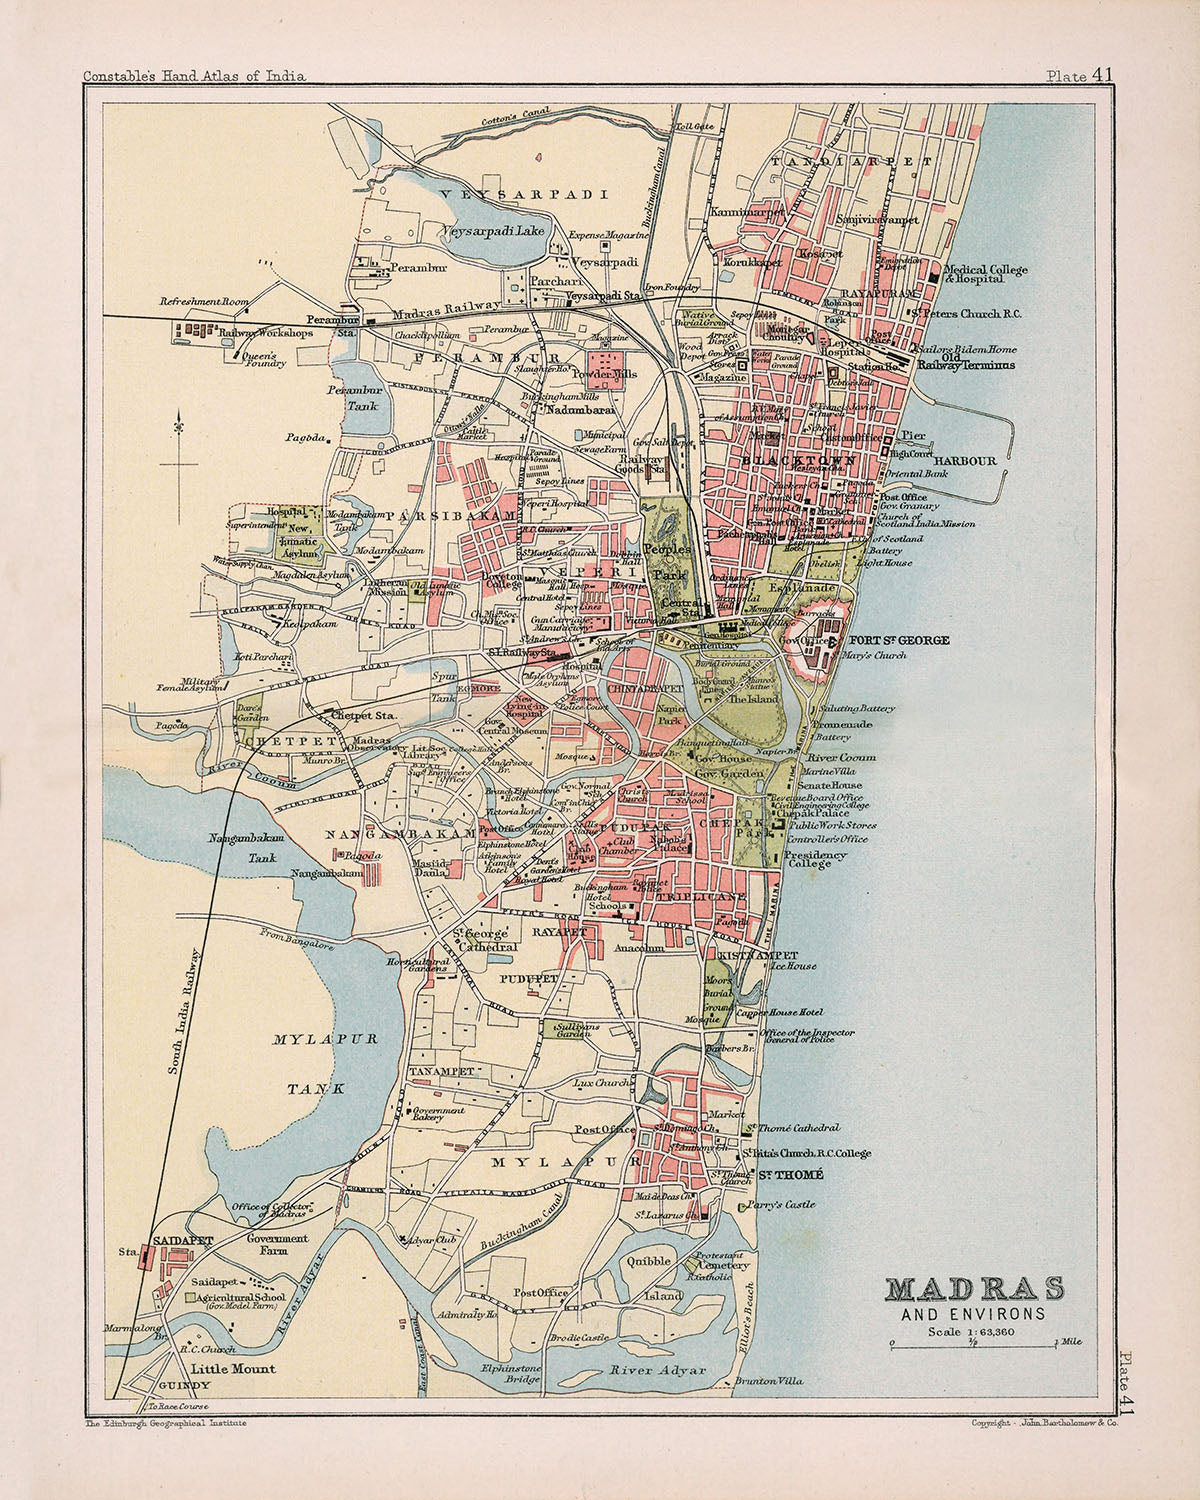 Old Map of Madras (Chennai), 1893: City Centre, Fort St. George, Marina Beach, Mylapore Temple